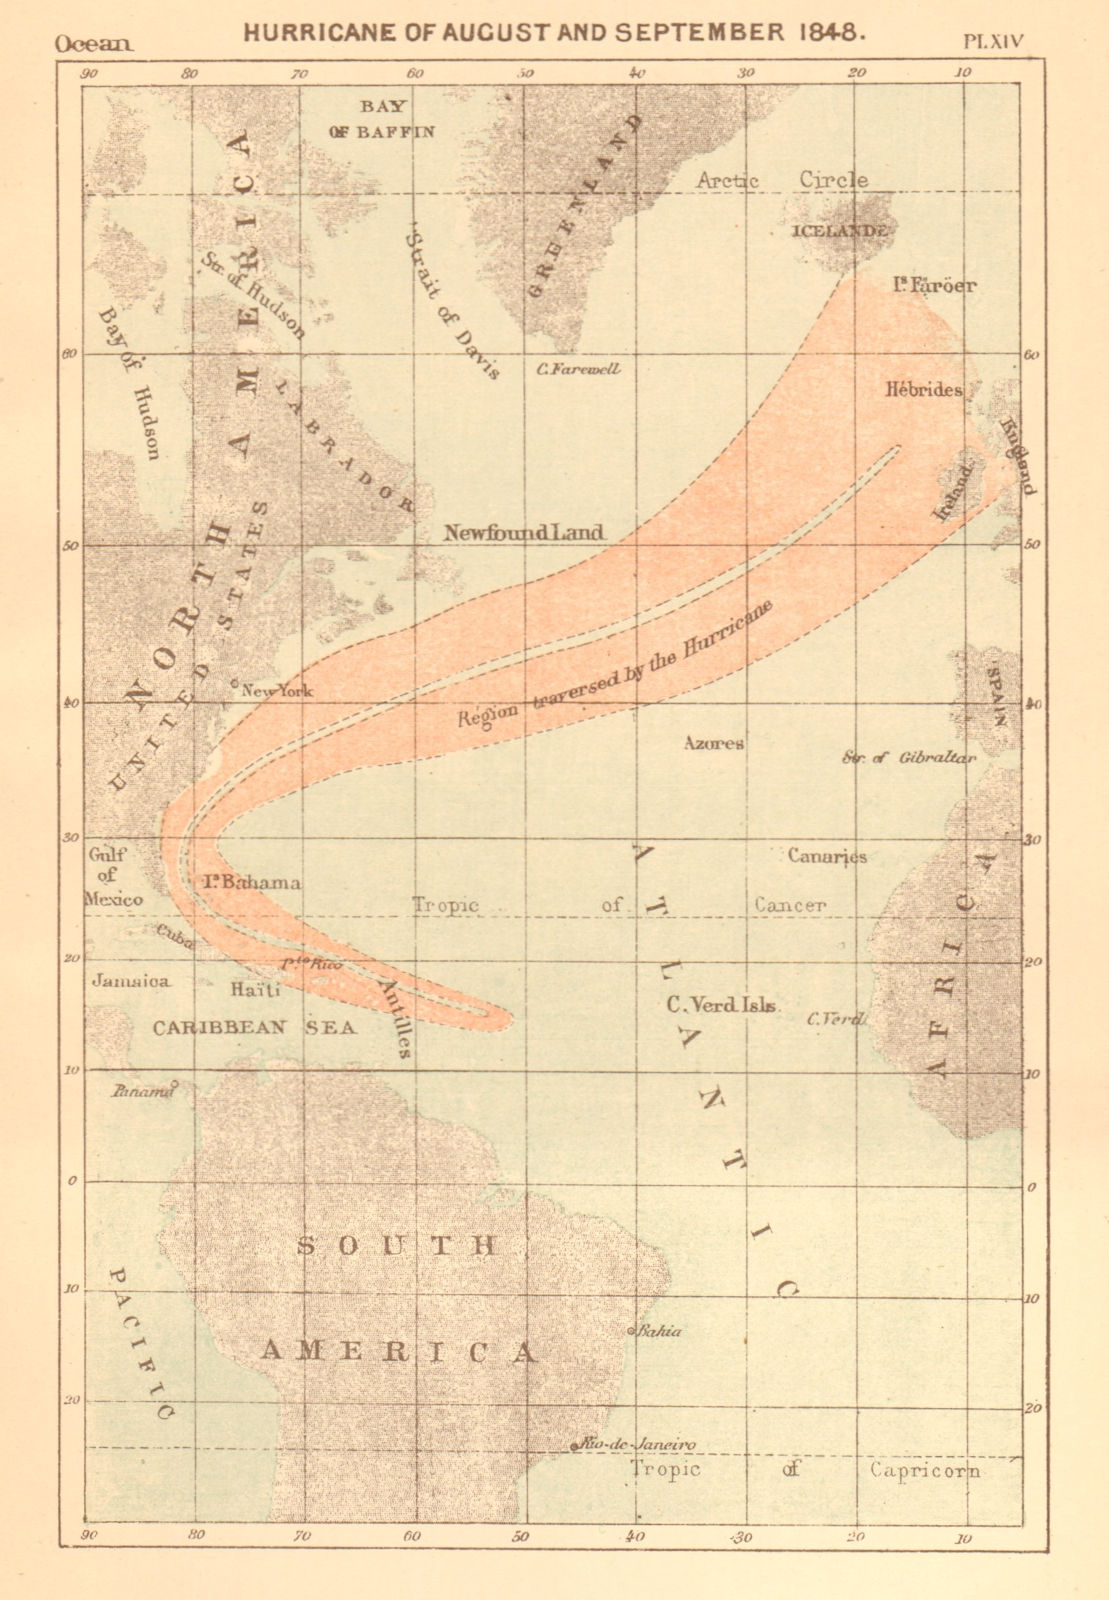 Associate Product Hurricane of August and September 1848. Atlantic Ocean. Tampa Bay 1886 old map